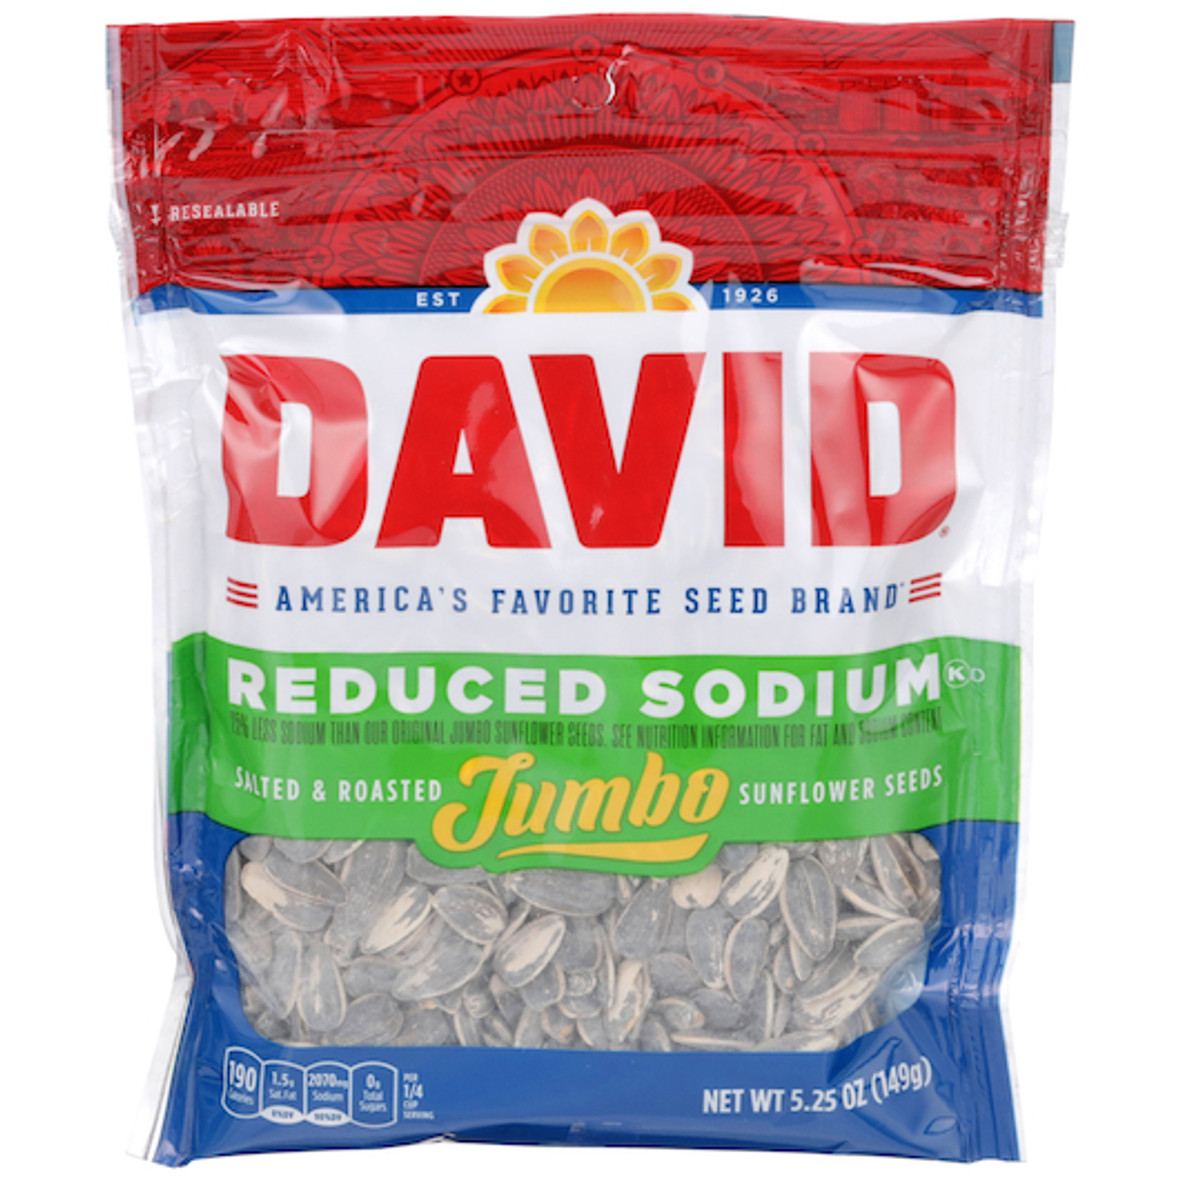 David Reduced Sodium In-Shell Sunflower Seeds, 5.25 Ounces, 12 Per Case